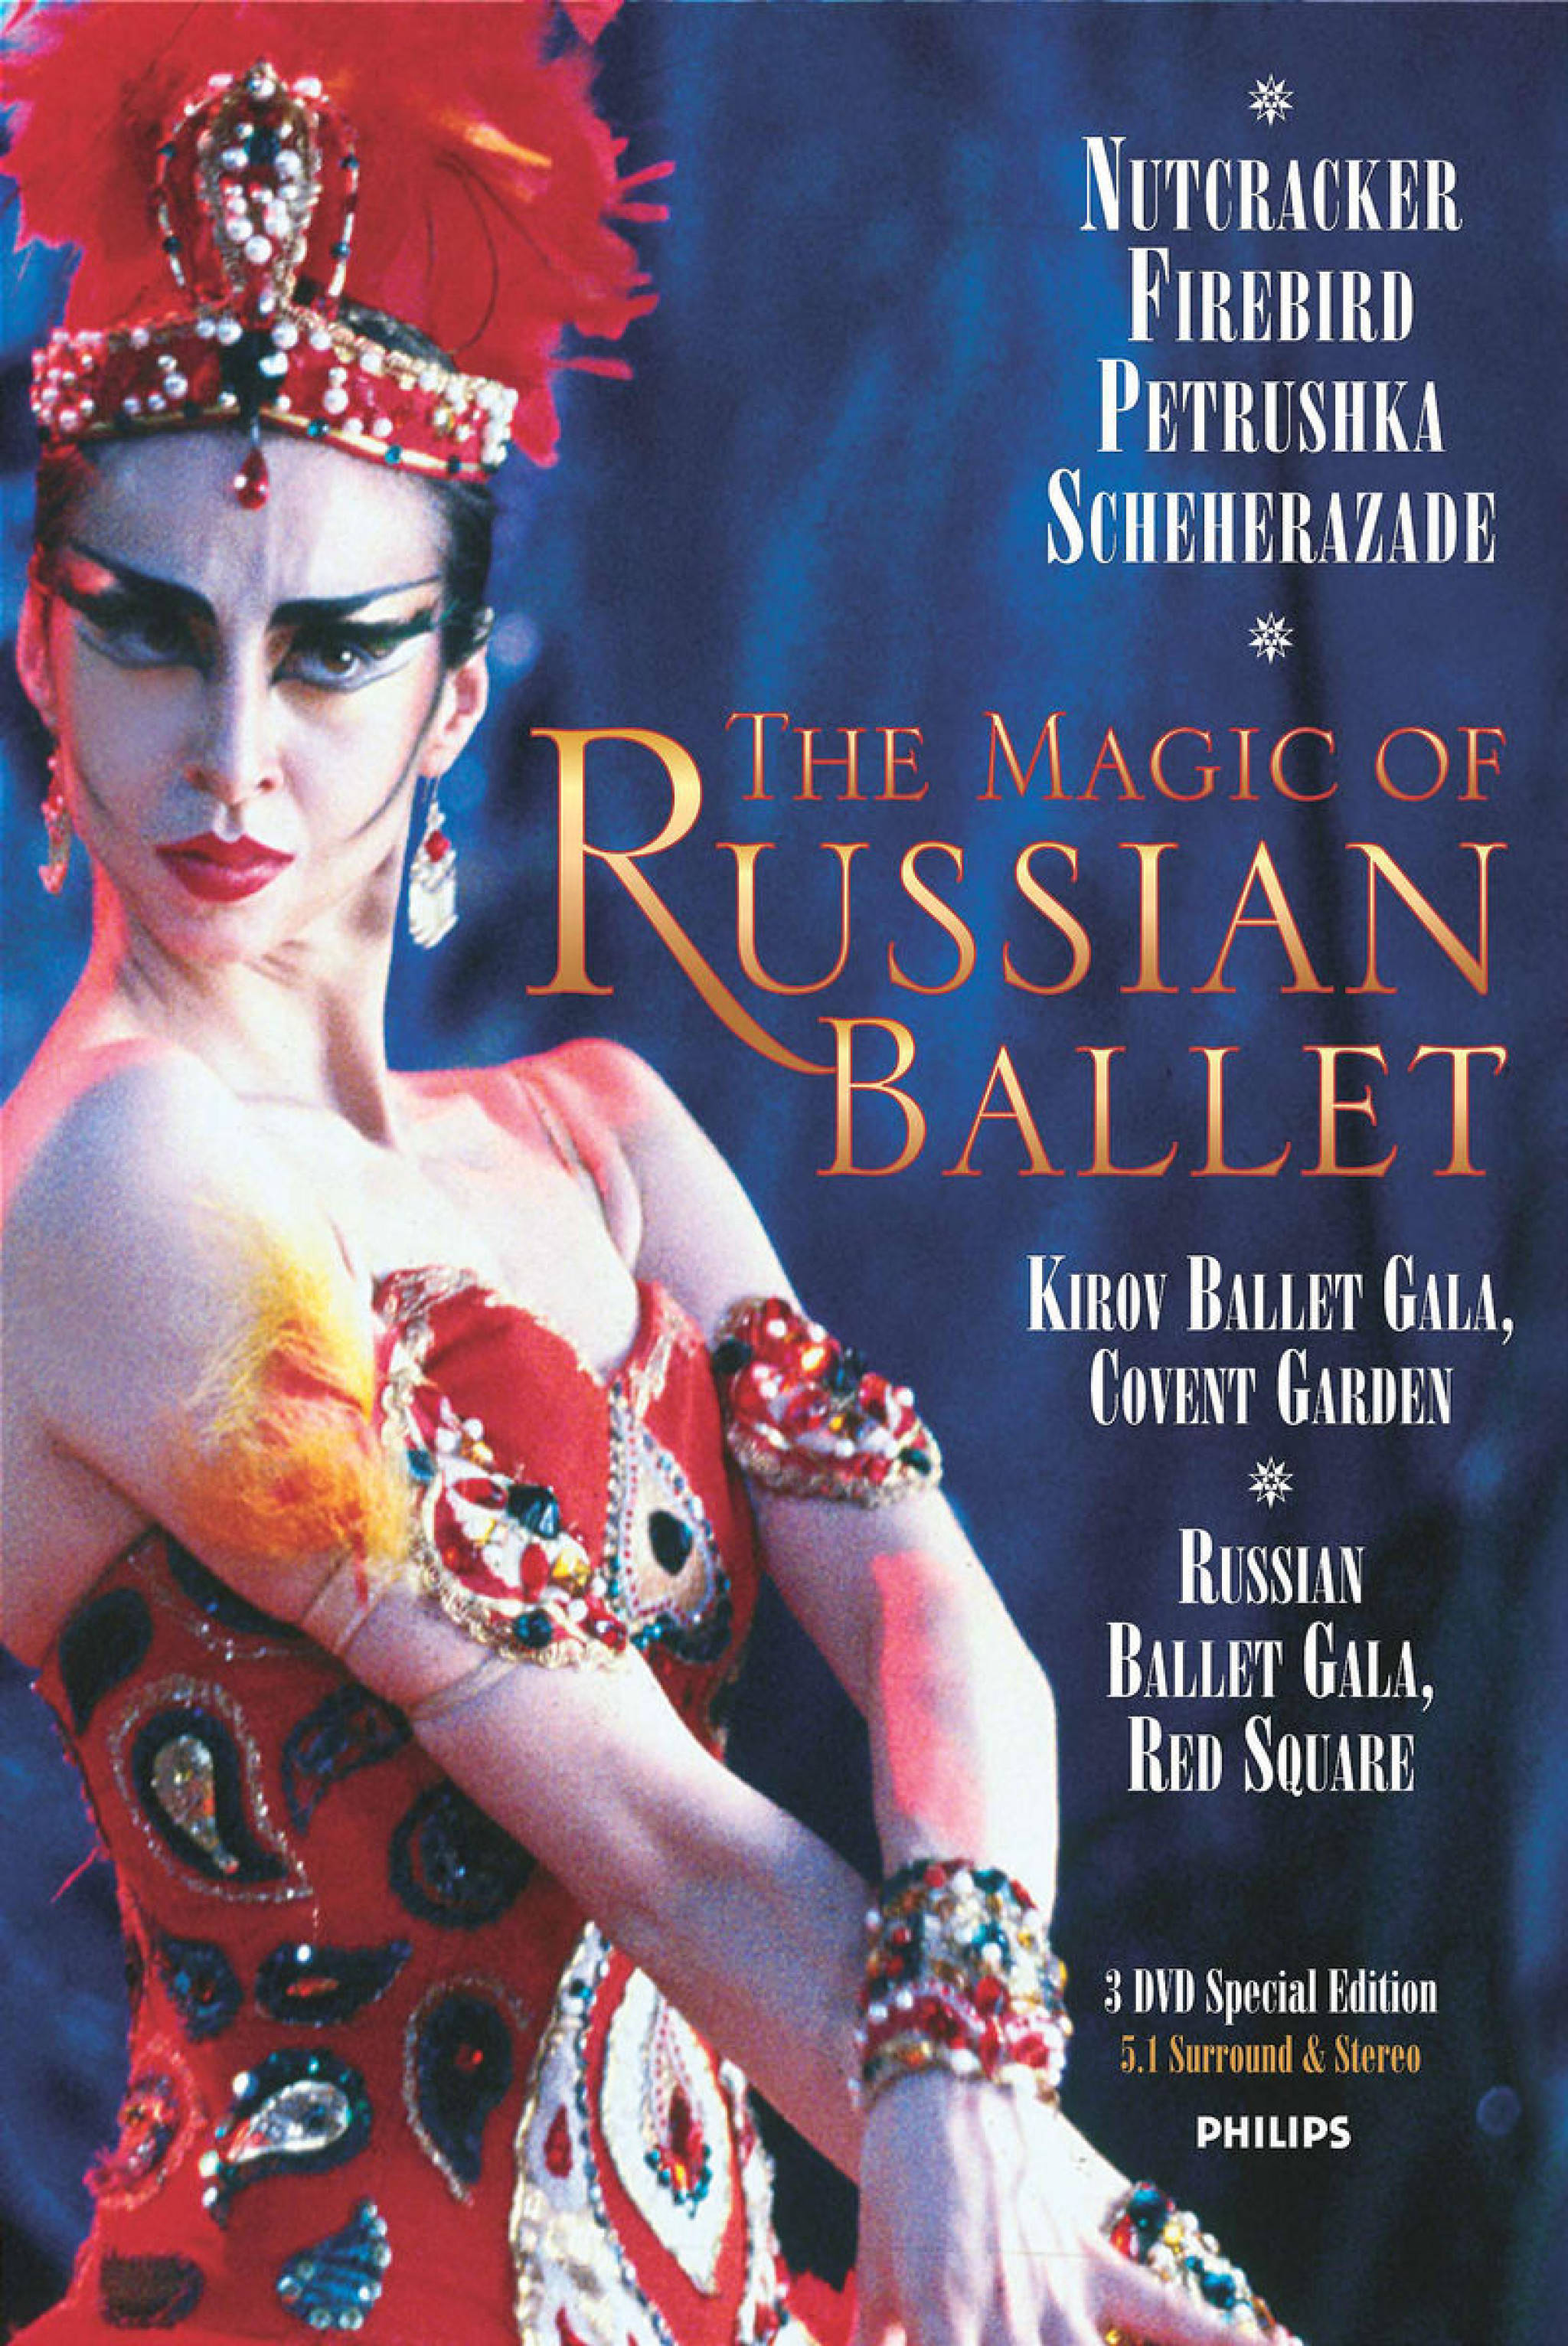 THE MAGIC OF RUSSIAN BALLET